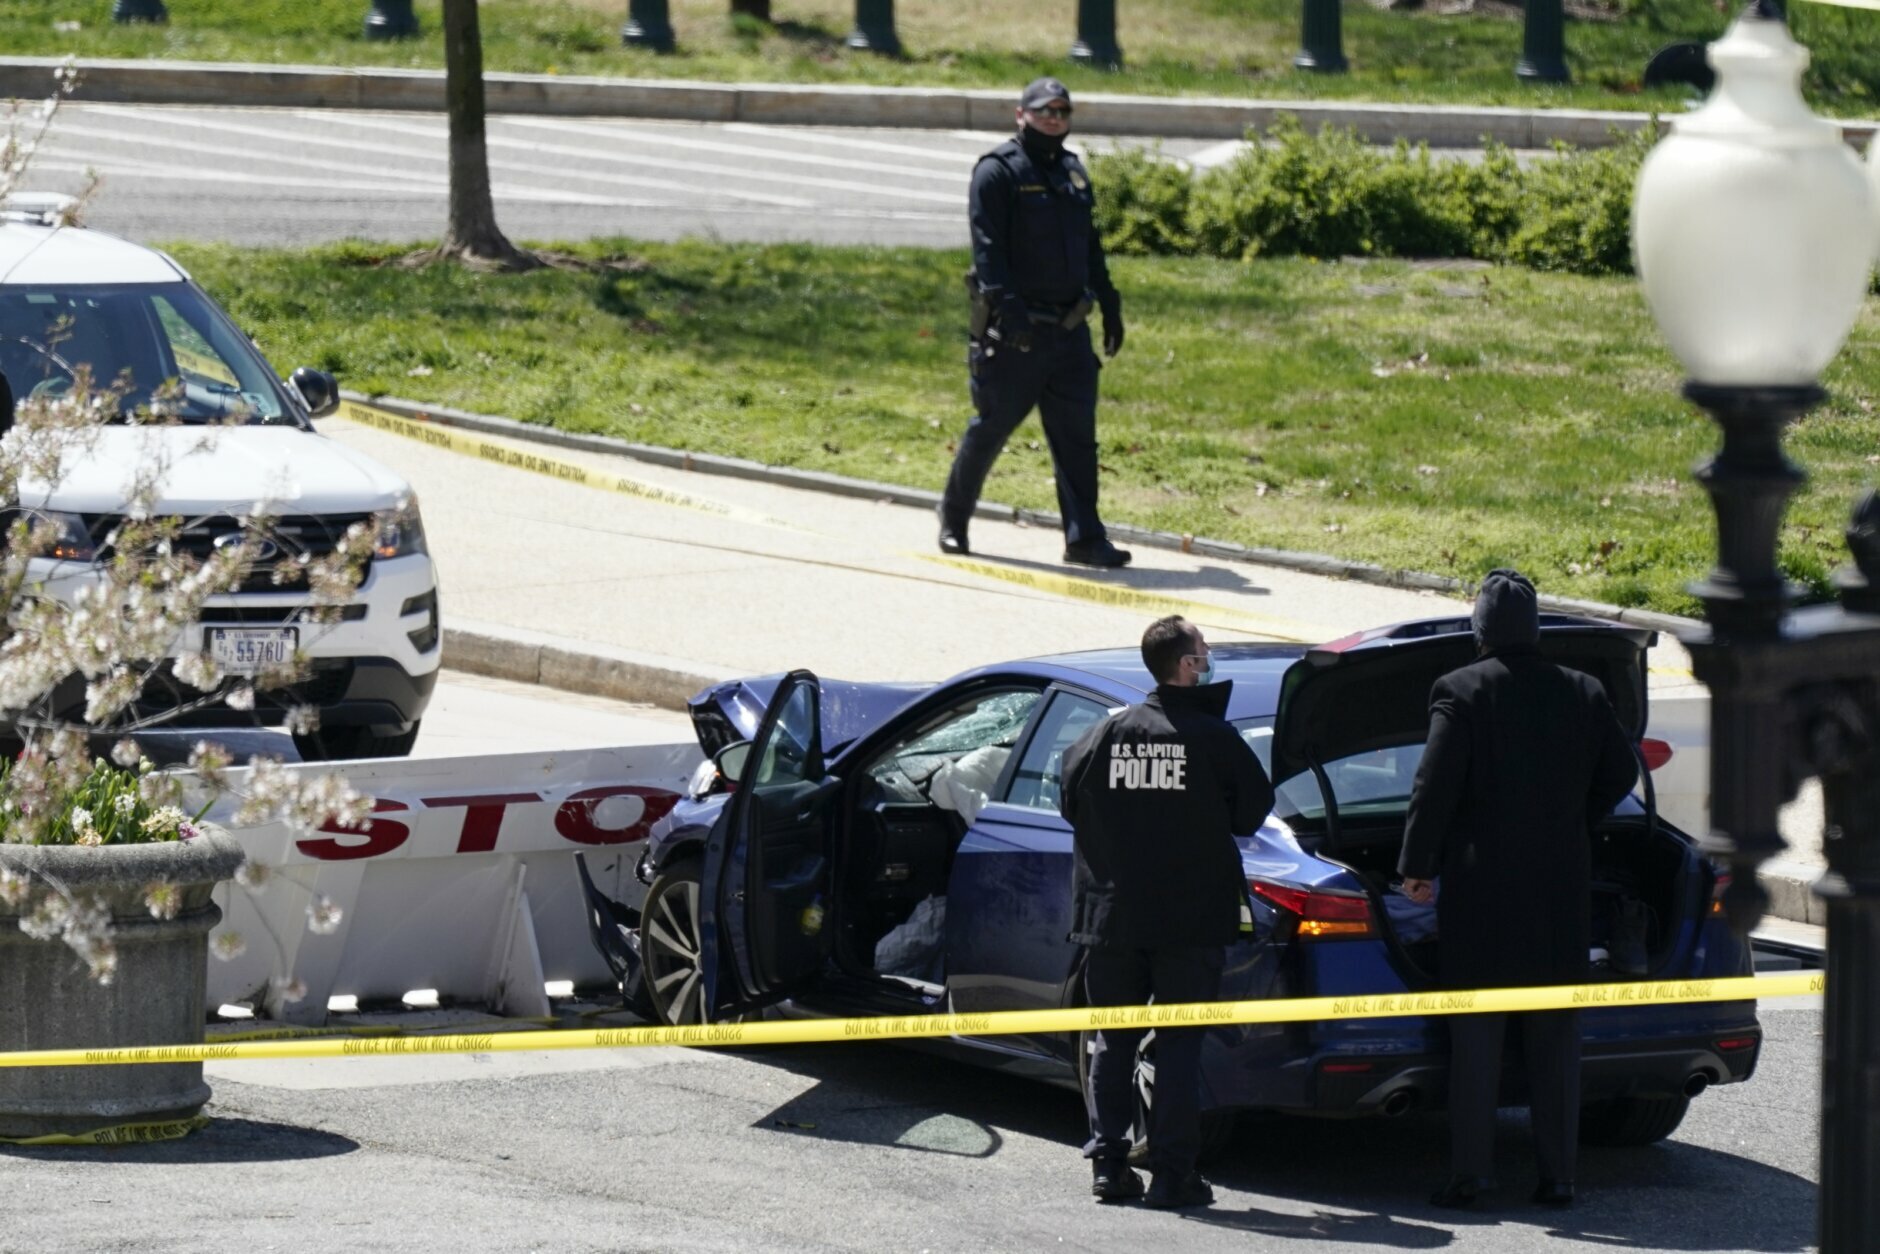 U.S. Capitol Police officers stand near a car that crashed into a barrier on Capitol Hill in Washington, Friday, April 2, 2021. (AP Photo/J. Scott Applewhite)